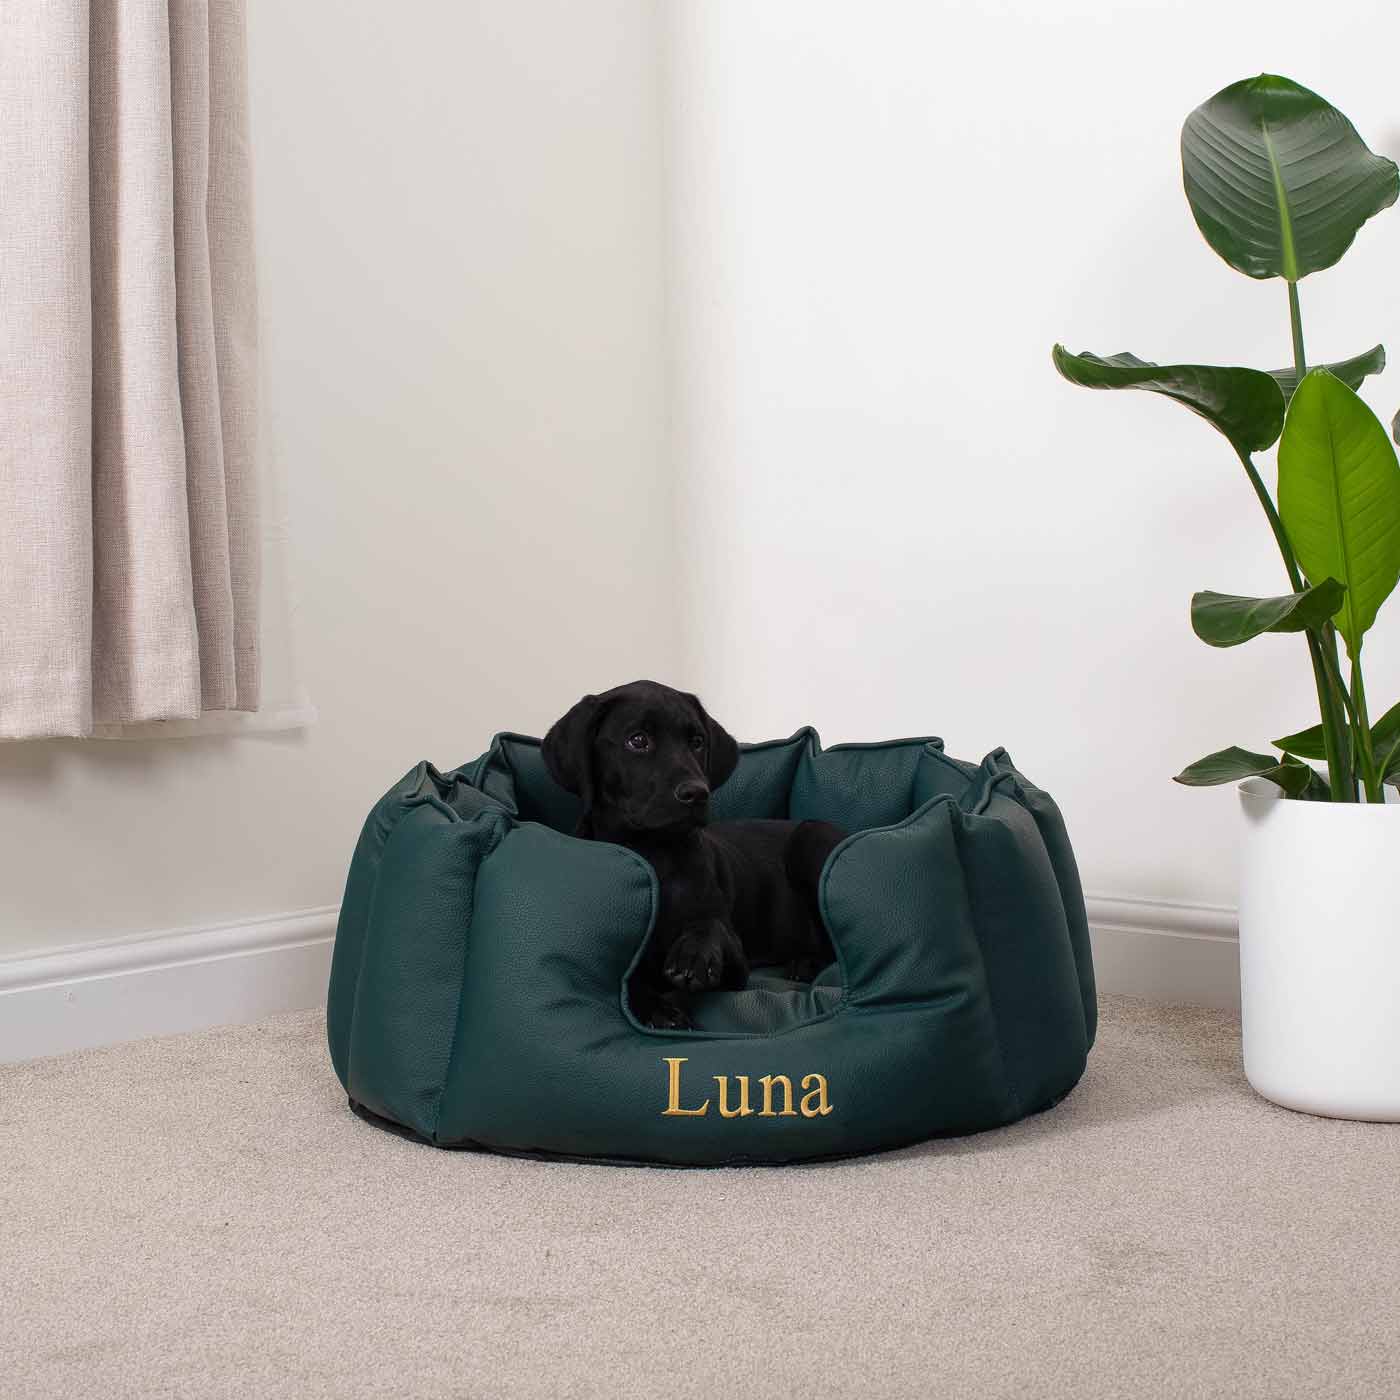 Luxury Handmade High Wall in Rhino Tough Jungle Faux Leather, in Forest Green, Perfect For Your Pets Nap Time! Available To Personalize at Lords & Labradors US